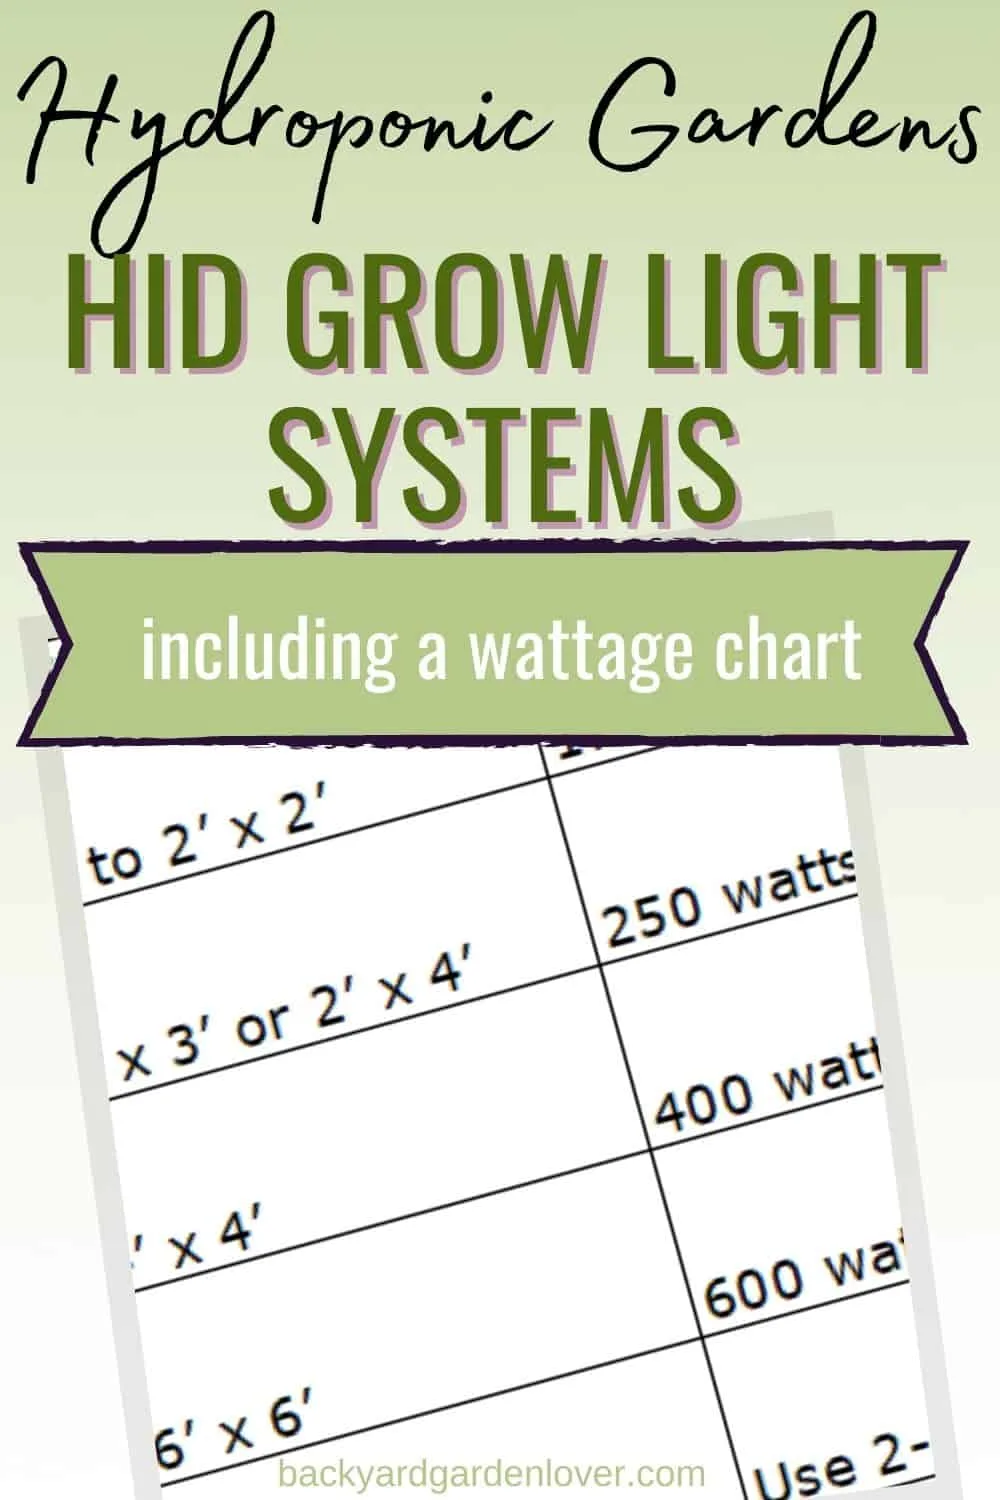 HID grow light systems for hydroponic gardens - Pinterest image